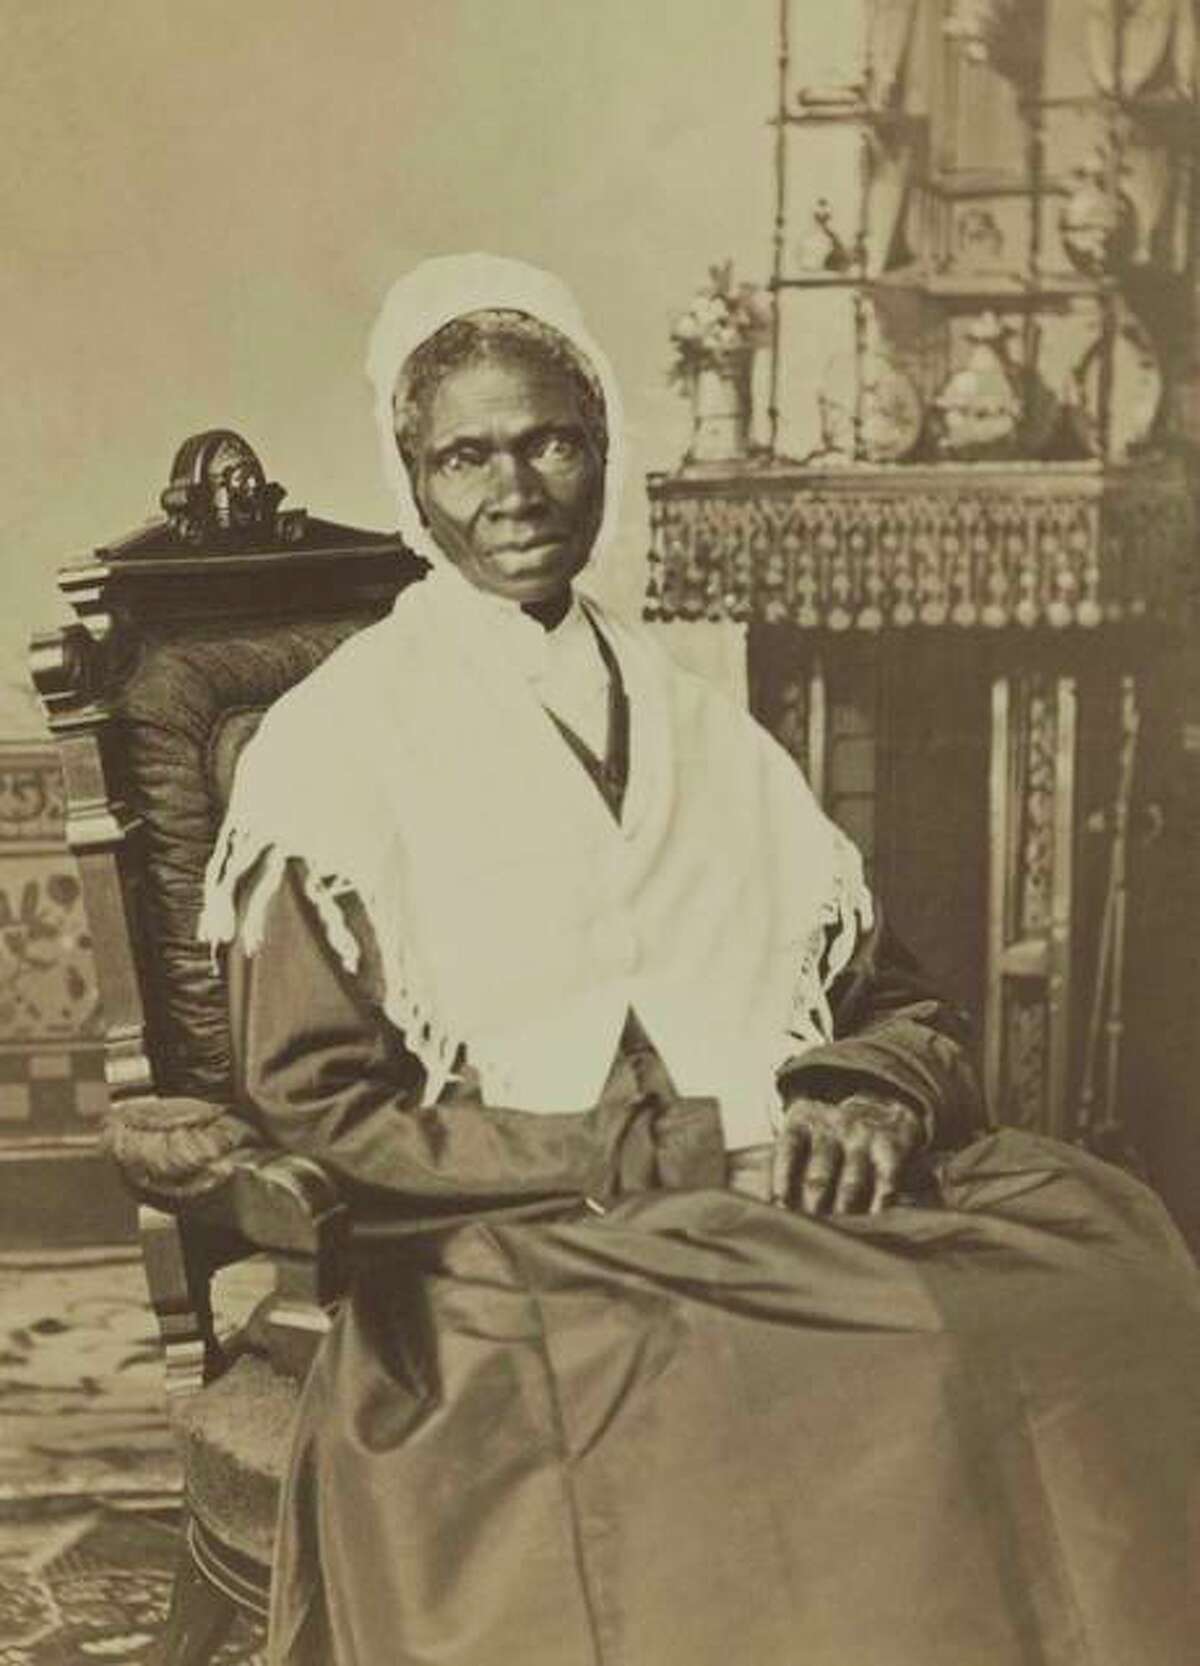 Sojourner Truth is pictured, circa 1870. An ex-slave, she preached against the cruelties of slavery and for human rights for African Americans and women. She lived in Battle Creek, Michigan.